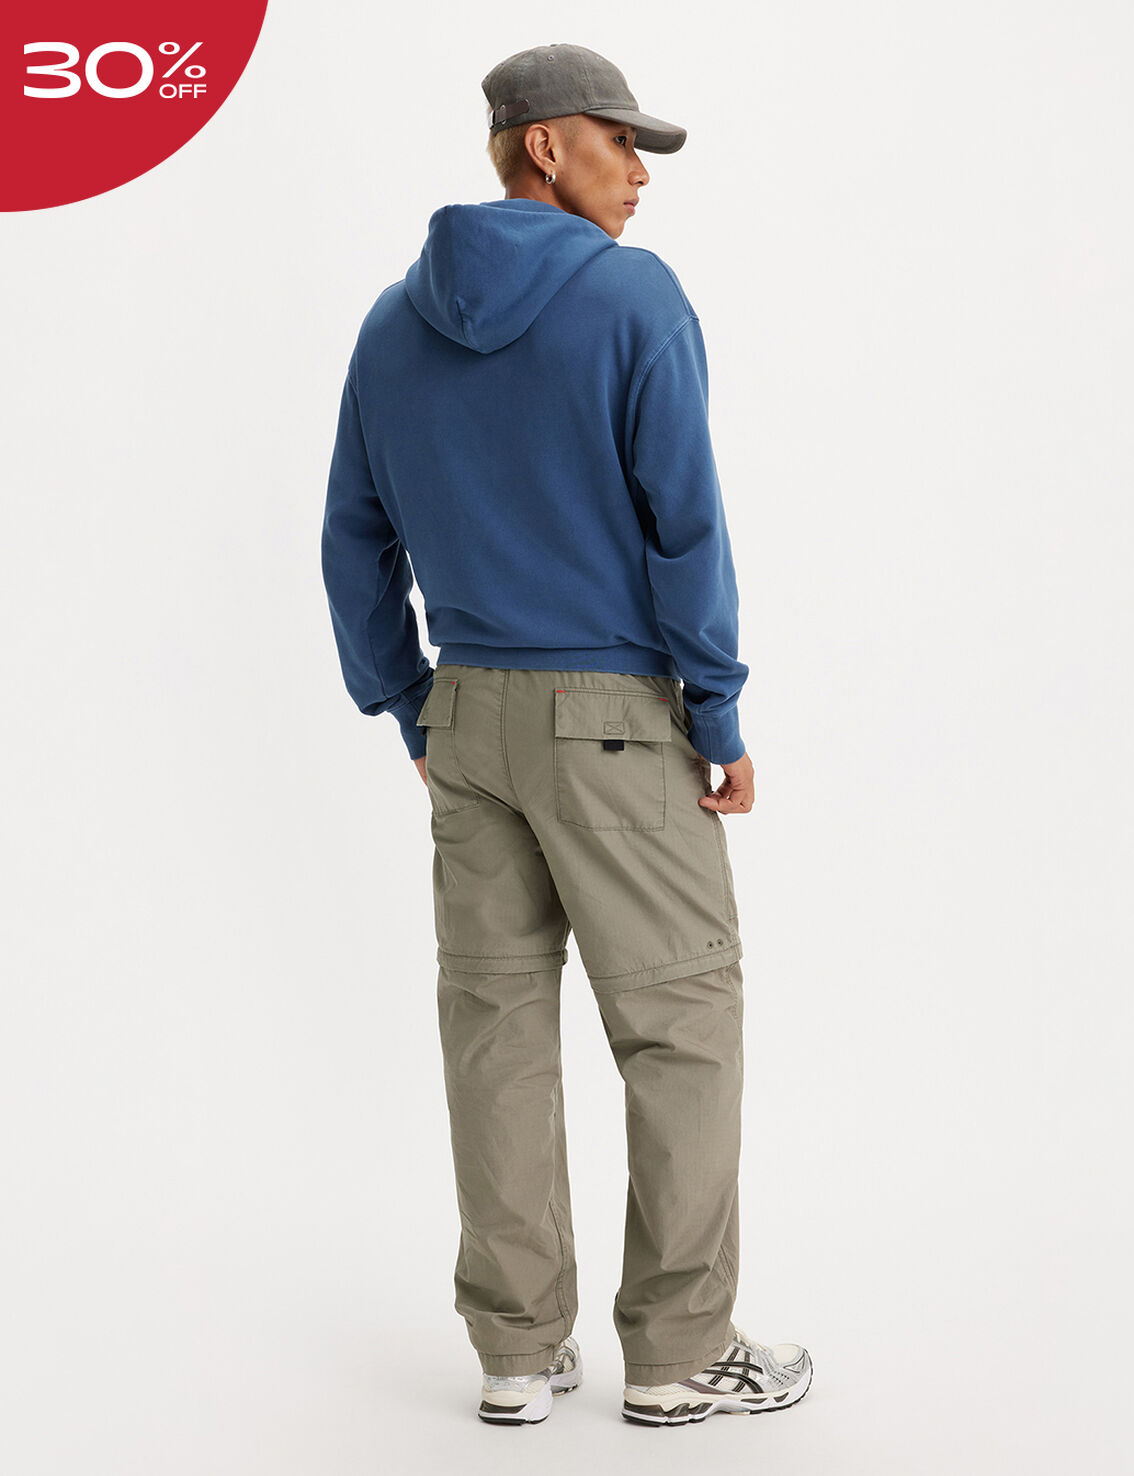 LEVI'S Utility Zip Off Pant in Smokey Olive